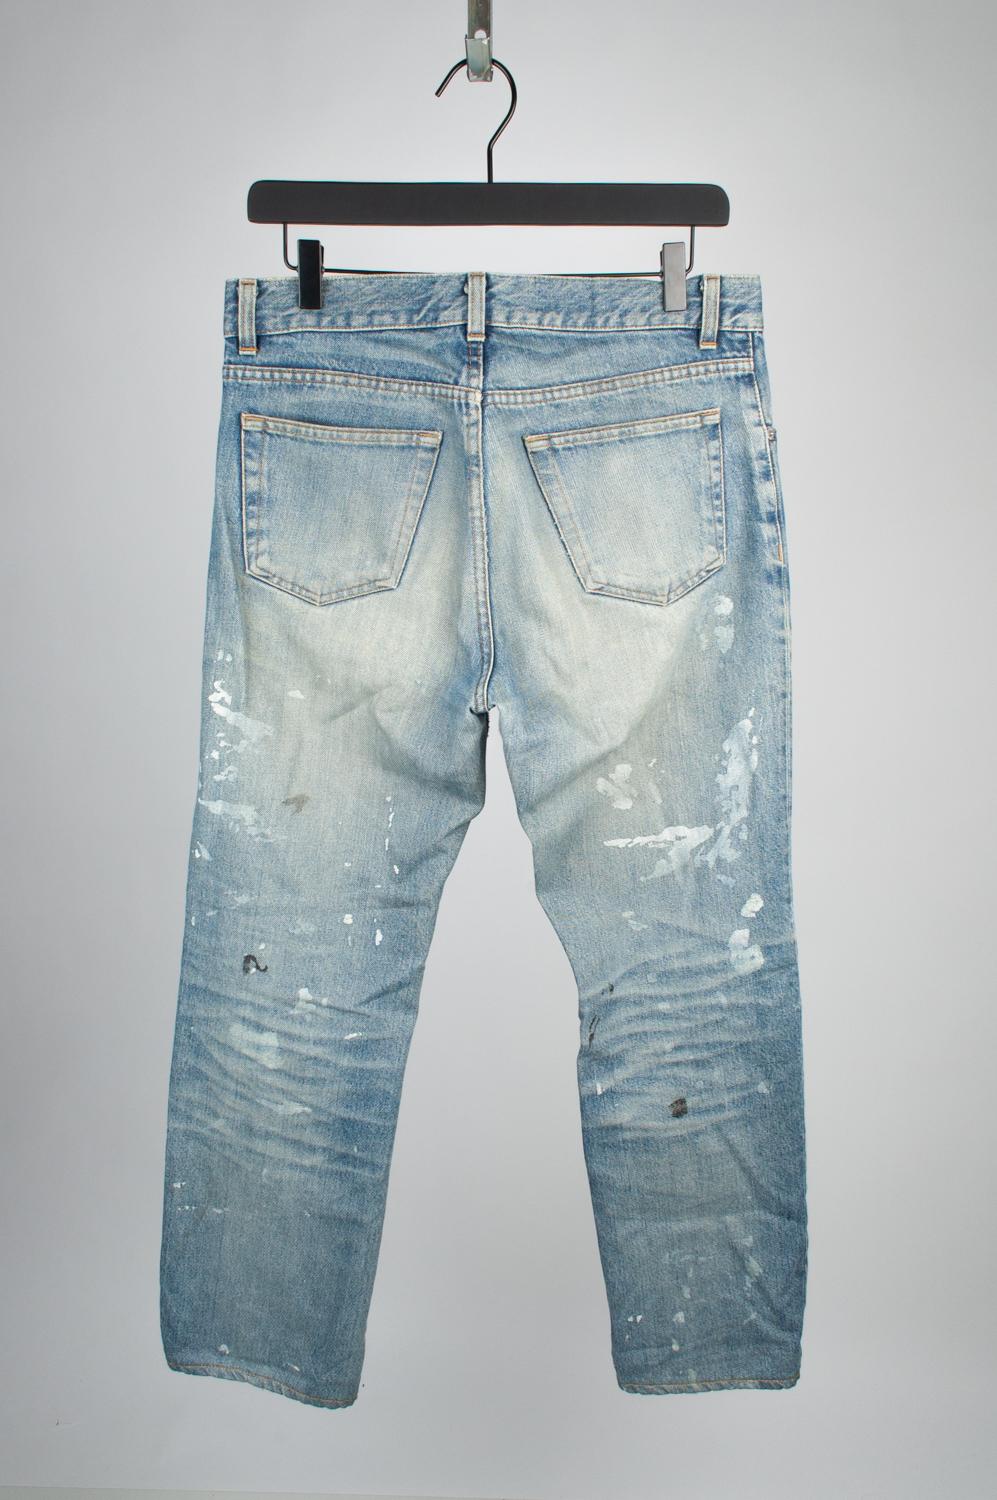 100% genuine Helmut Lang Vintage Painter Jeans, nocode
Color: Blue
(An actual color may a bit vary due to individual computer screen interpretation)
Material: 100% cotton
Tag size: 31, shortened to inseam only 27”
These jeans are great quality item.